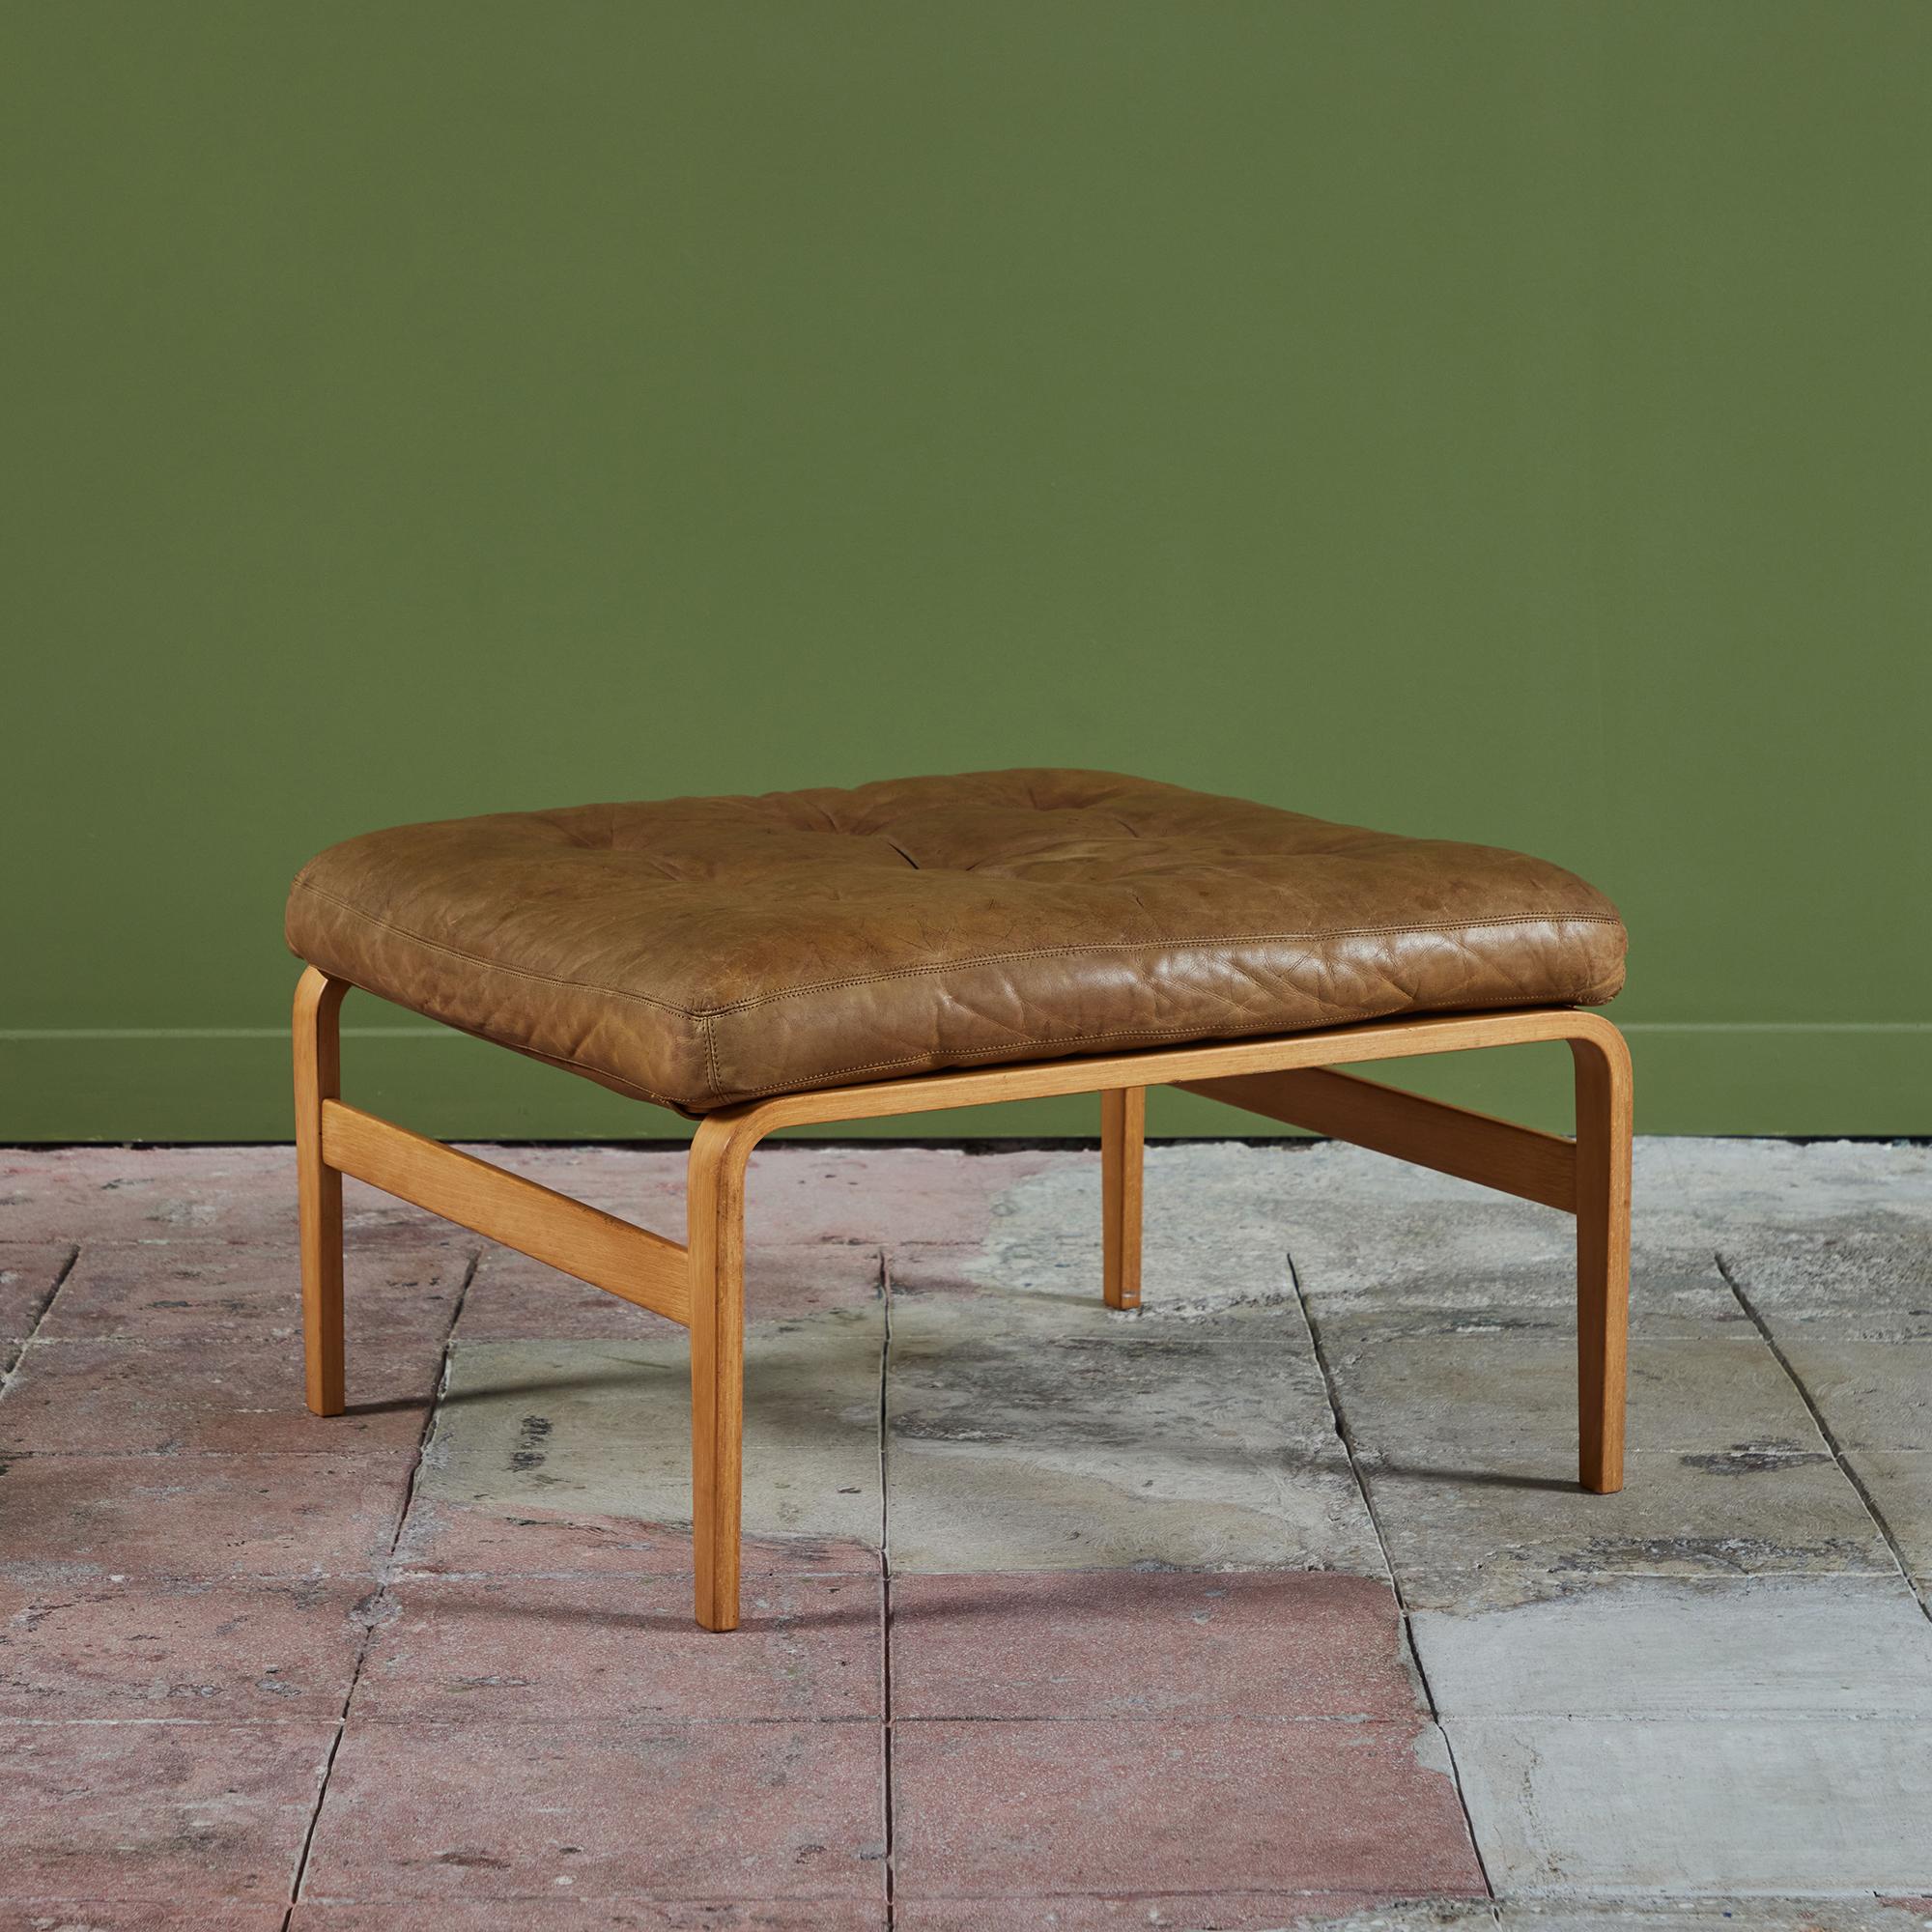 Ottoman by Bruno Mathsson for DUX, c.1960s, Sweden. The ottoman was originally paired with the Ingrid armchair. This piece features a tufted caramel leather seat on a bent beech wood frame.

Dimensions 
27” width x 27” depth x 15.5”